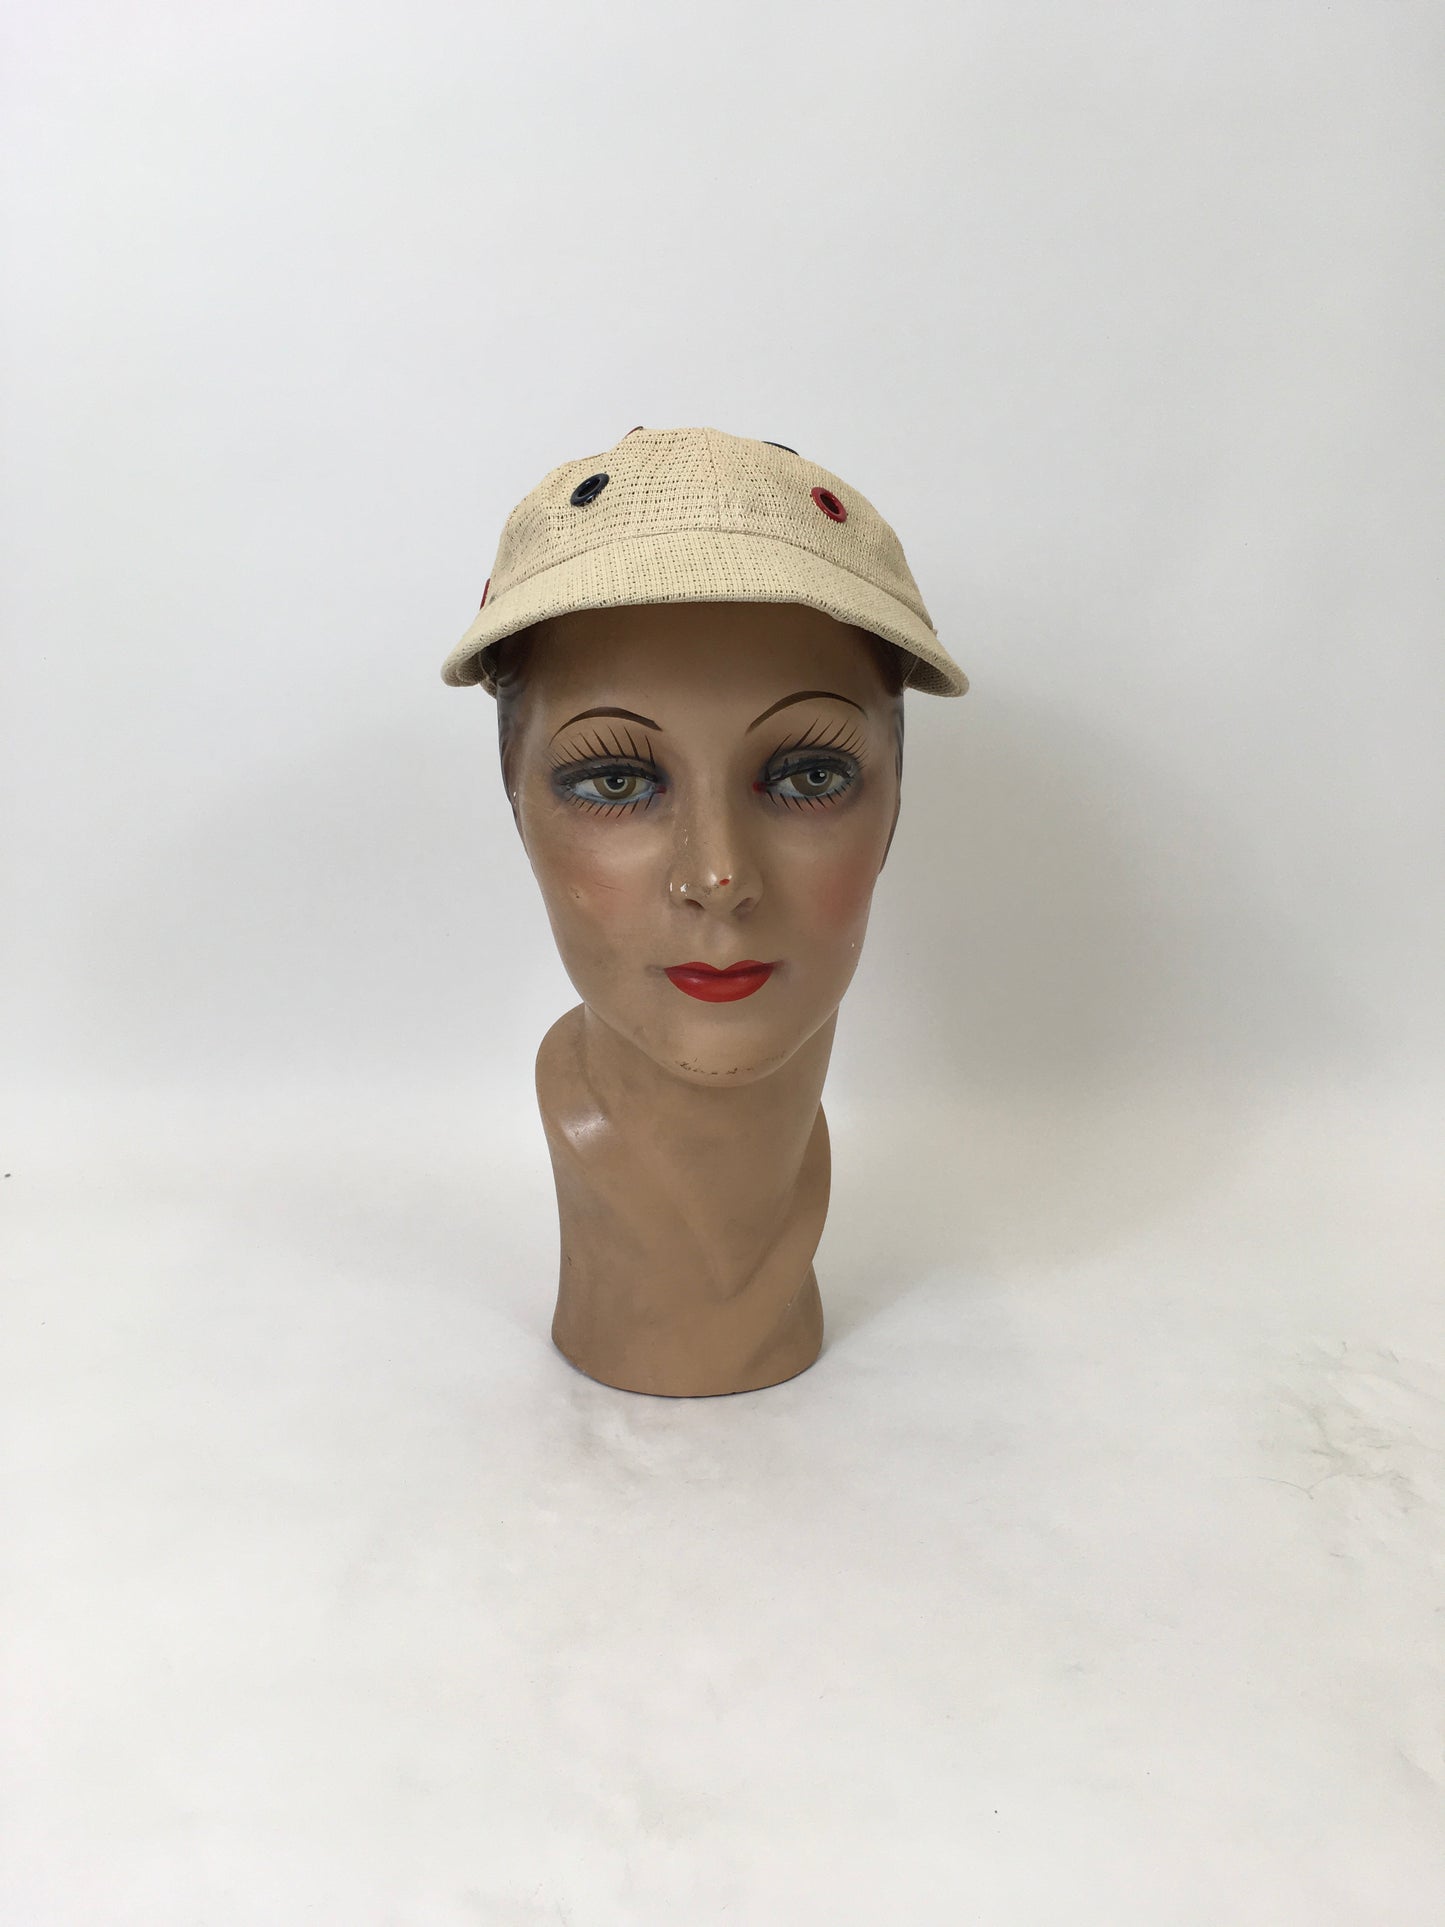 Vintage 1930's Stunning Sports Cap - In A Cream Mesh Fabric With Metal Eyelets in Blue & Red